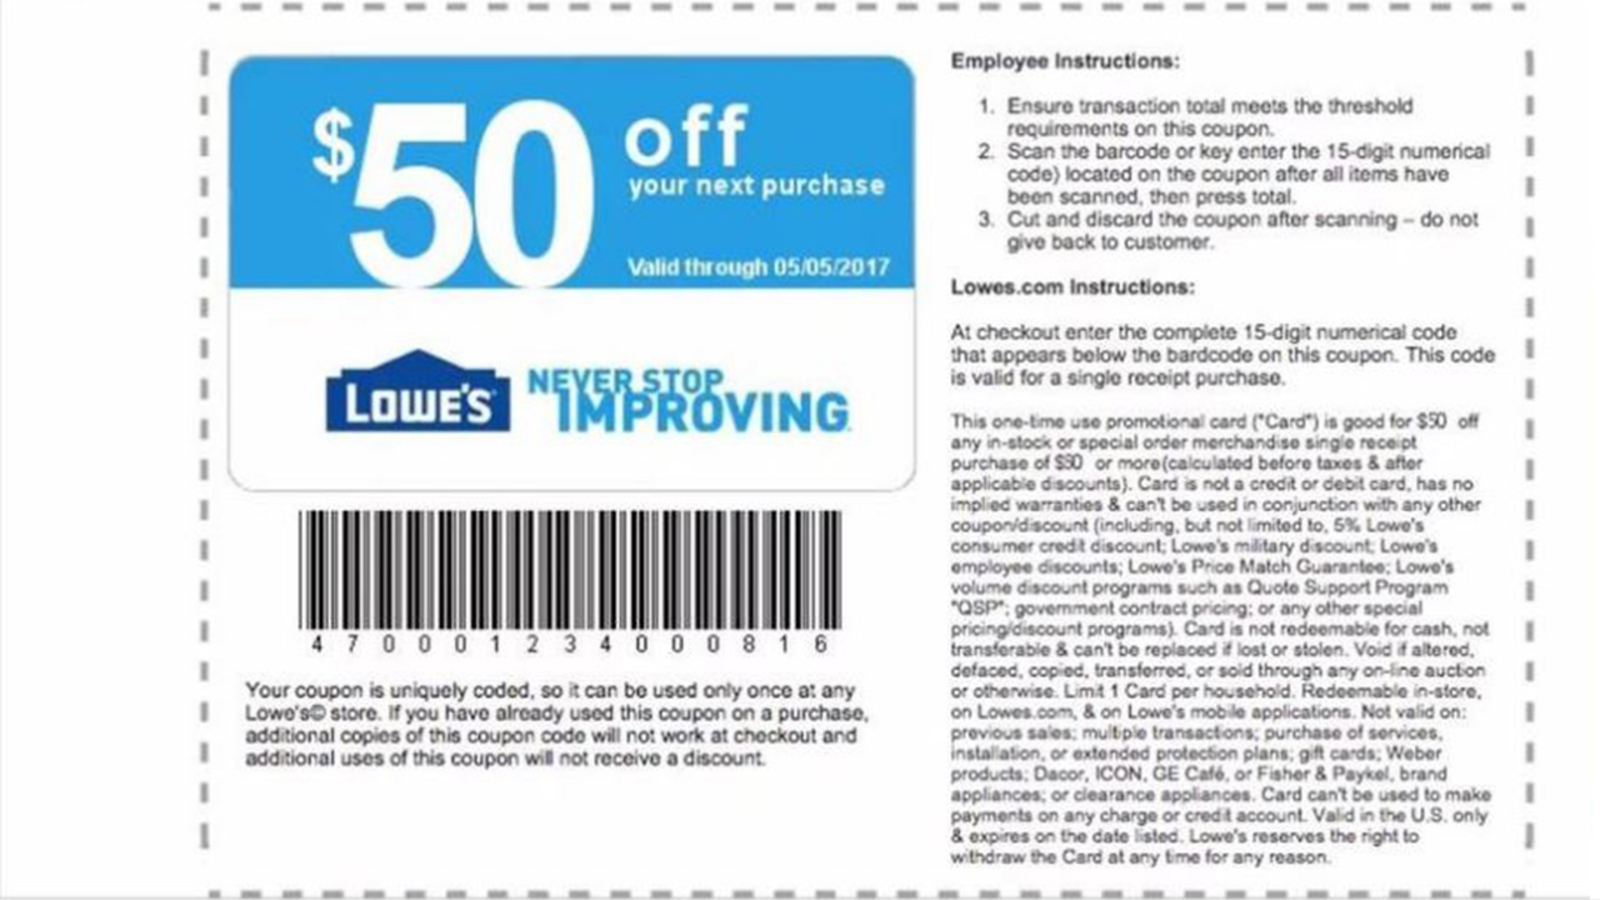 Use in the Lowes military discount within the system correctly